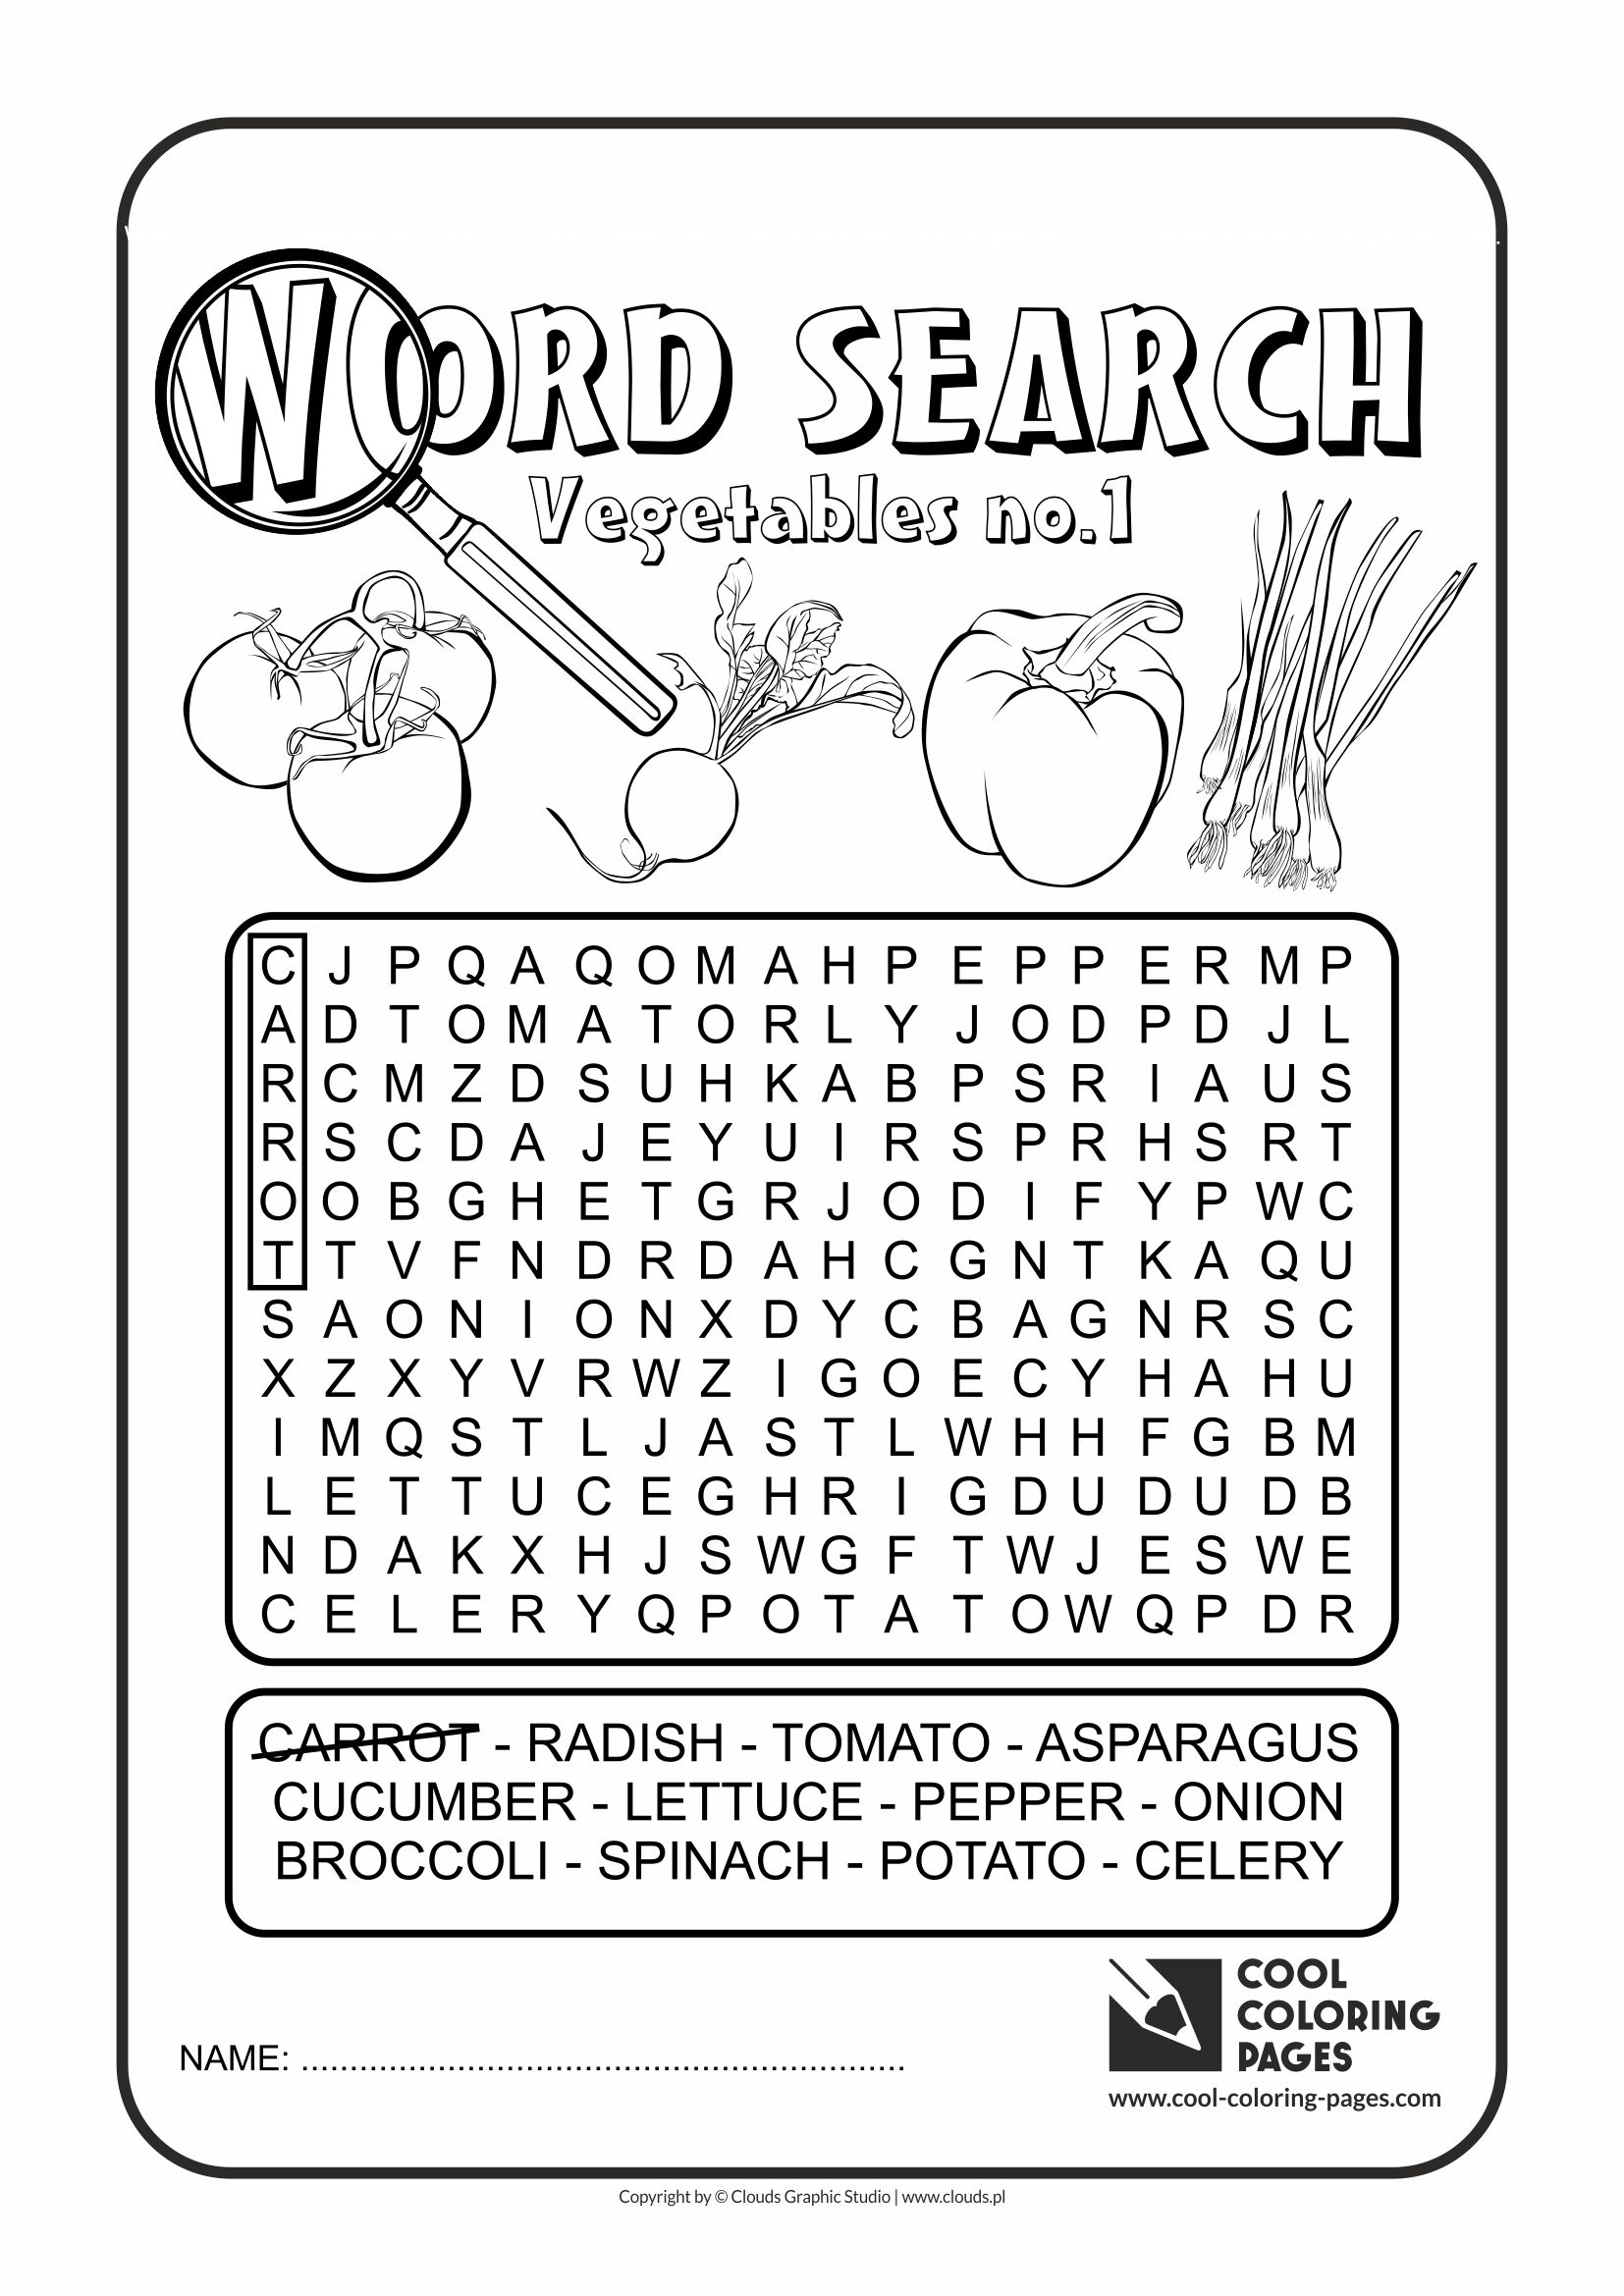 Cool Coloring Pages Word search vegetables no 1 - Cool Coloring Pages | Free ...1654 x 2339